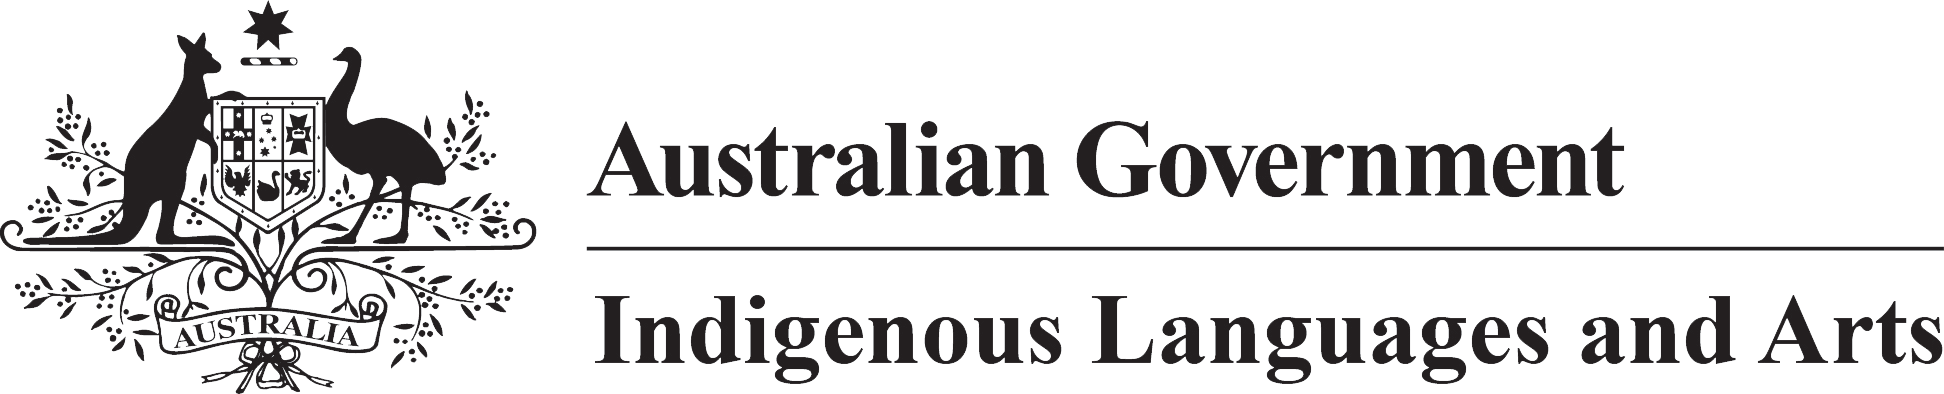 Australian Government - Indigenous Languages and Arts logo